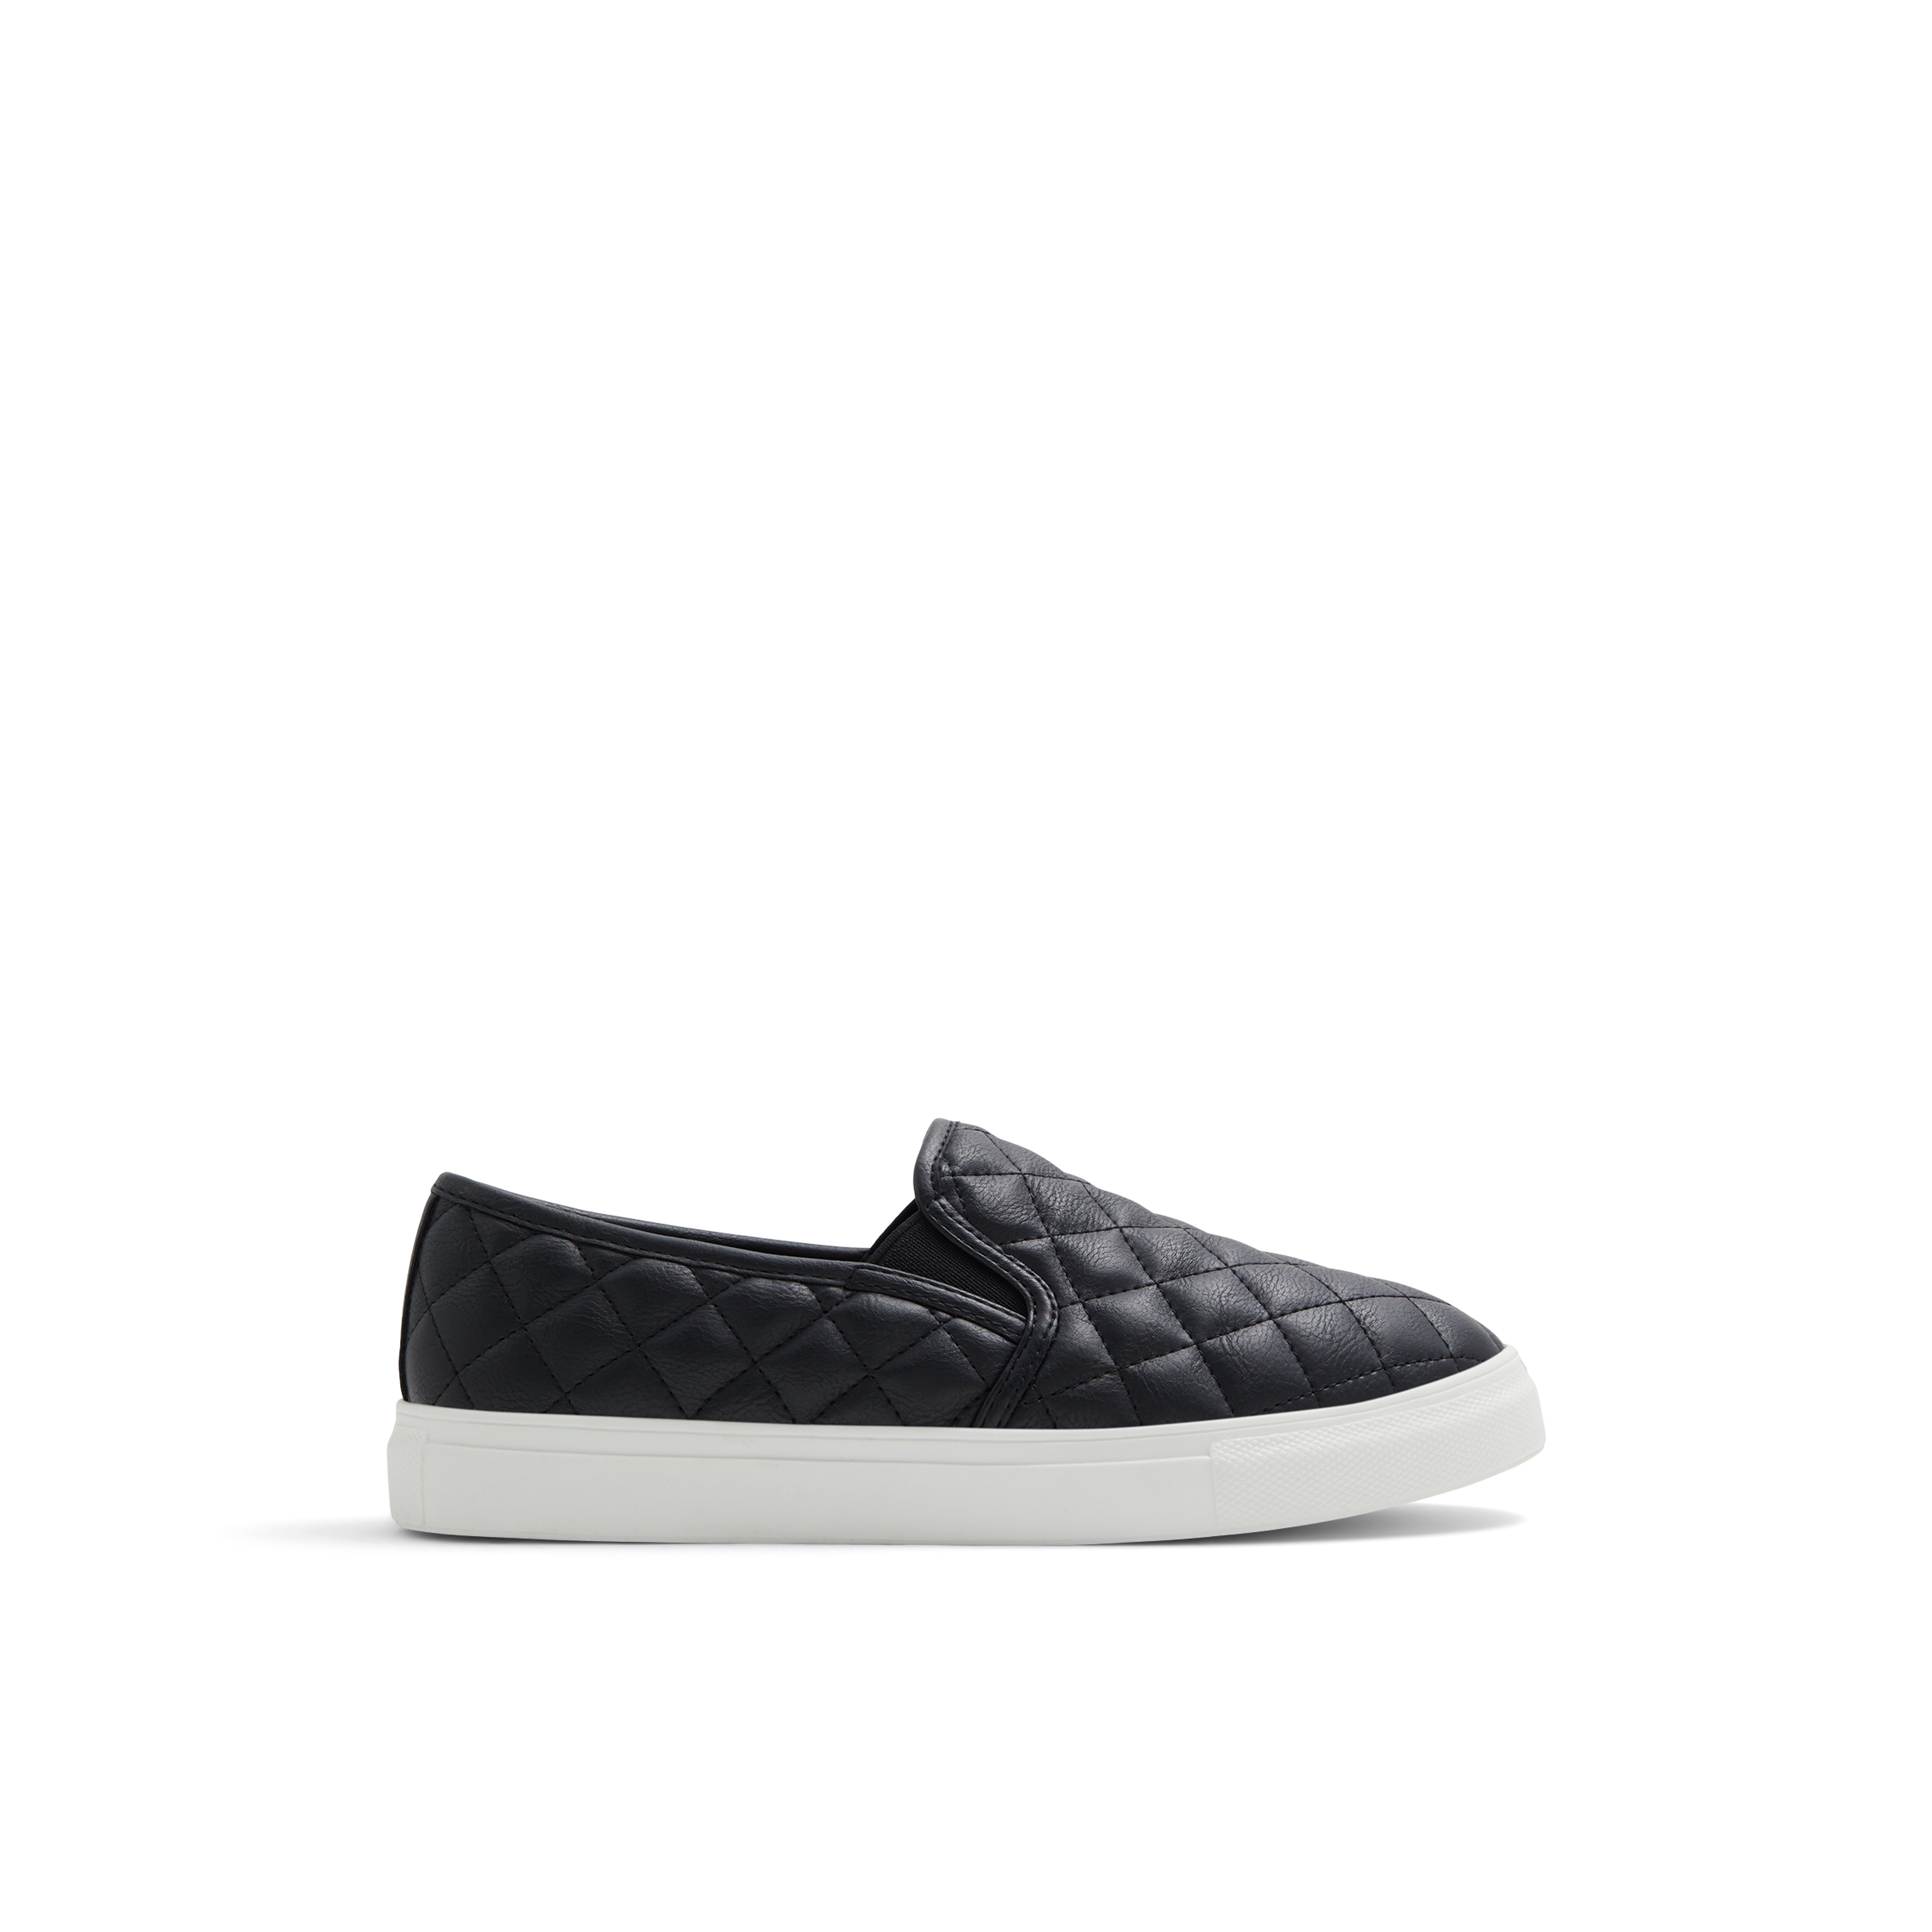 Iggyy Low top sneakers - Flat shoes